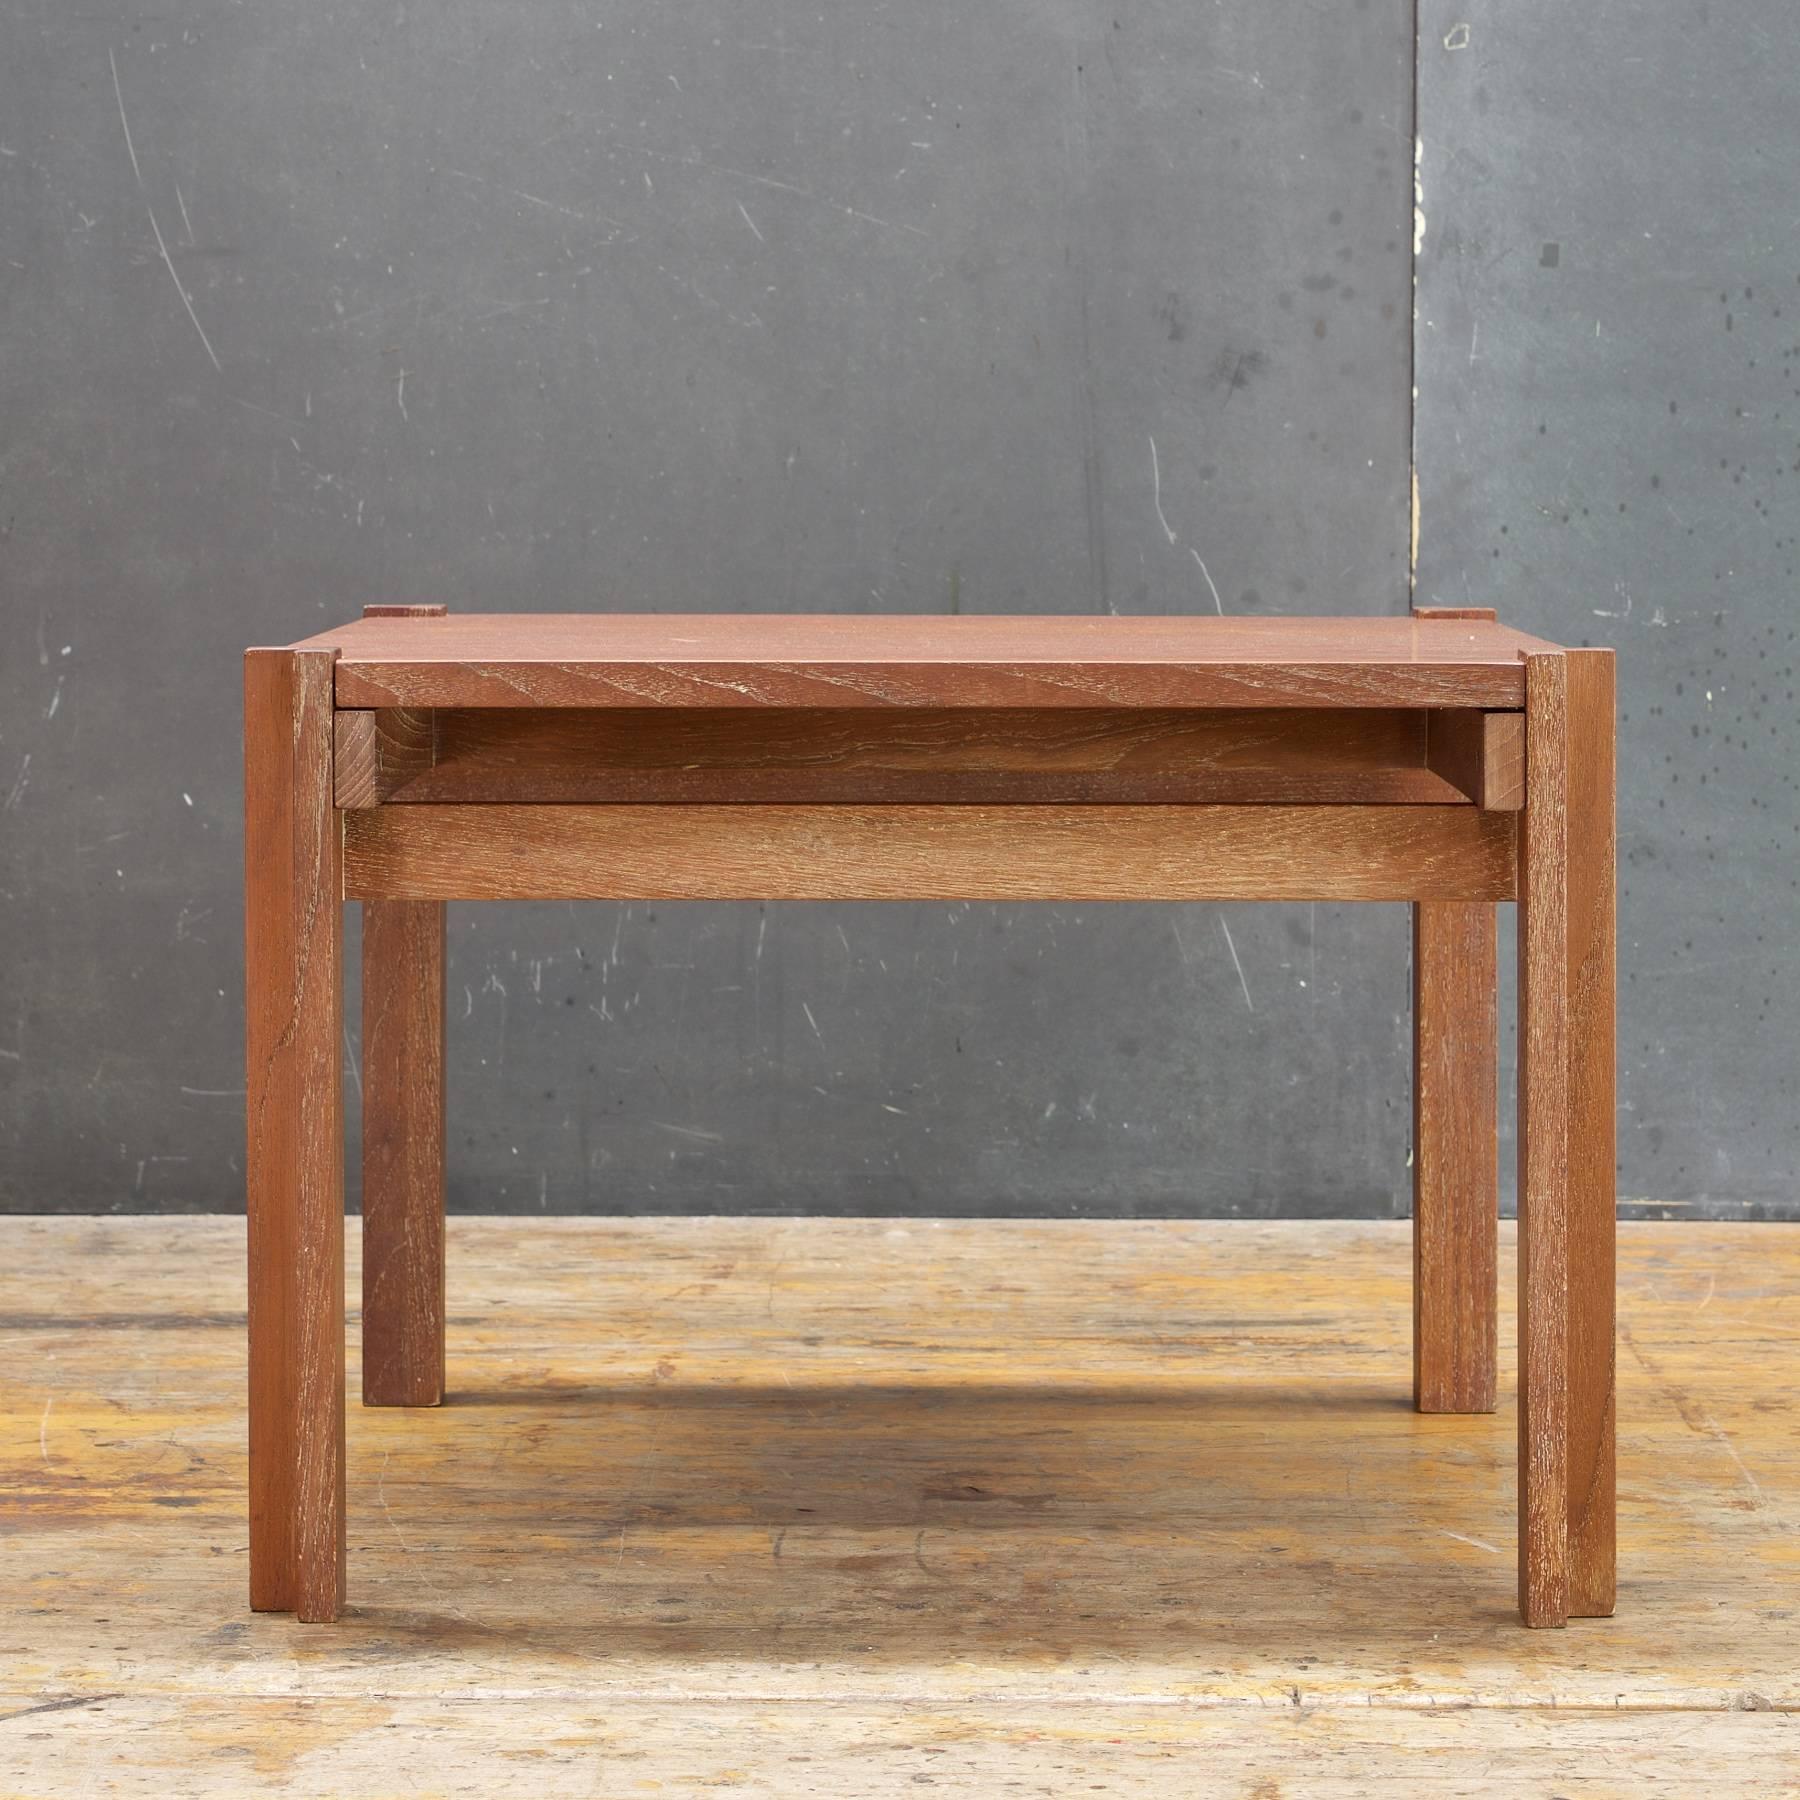 Attributed to Werner Blaser for Wells Furniture Mfg. of Chicago. Rare vintage Mid-Century teak geometric bauhaus styled occasional table distributed by John Stuart with metal medallion on frame. 

Table surface is a flip top, bottom surface